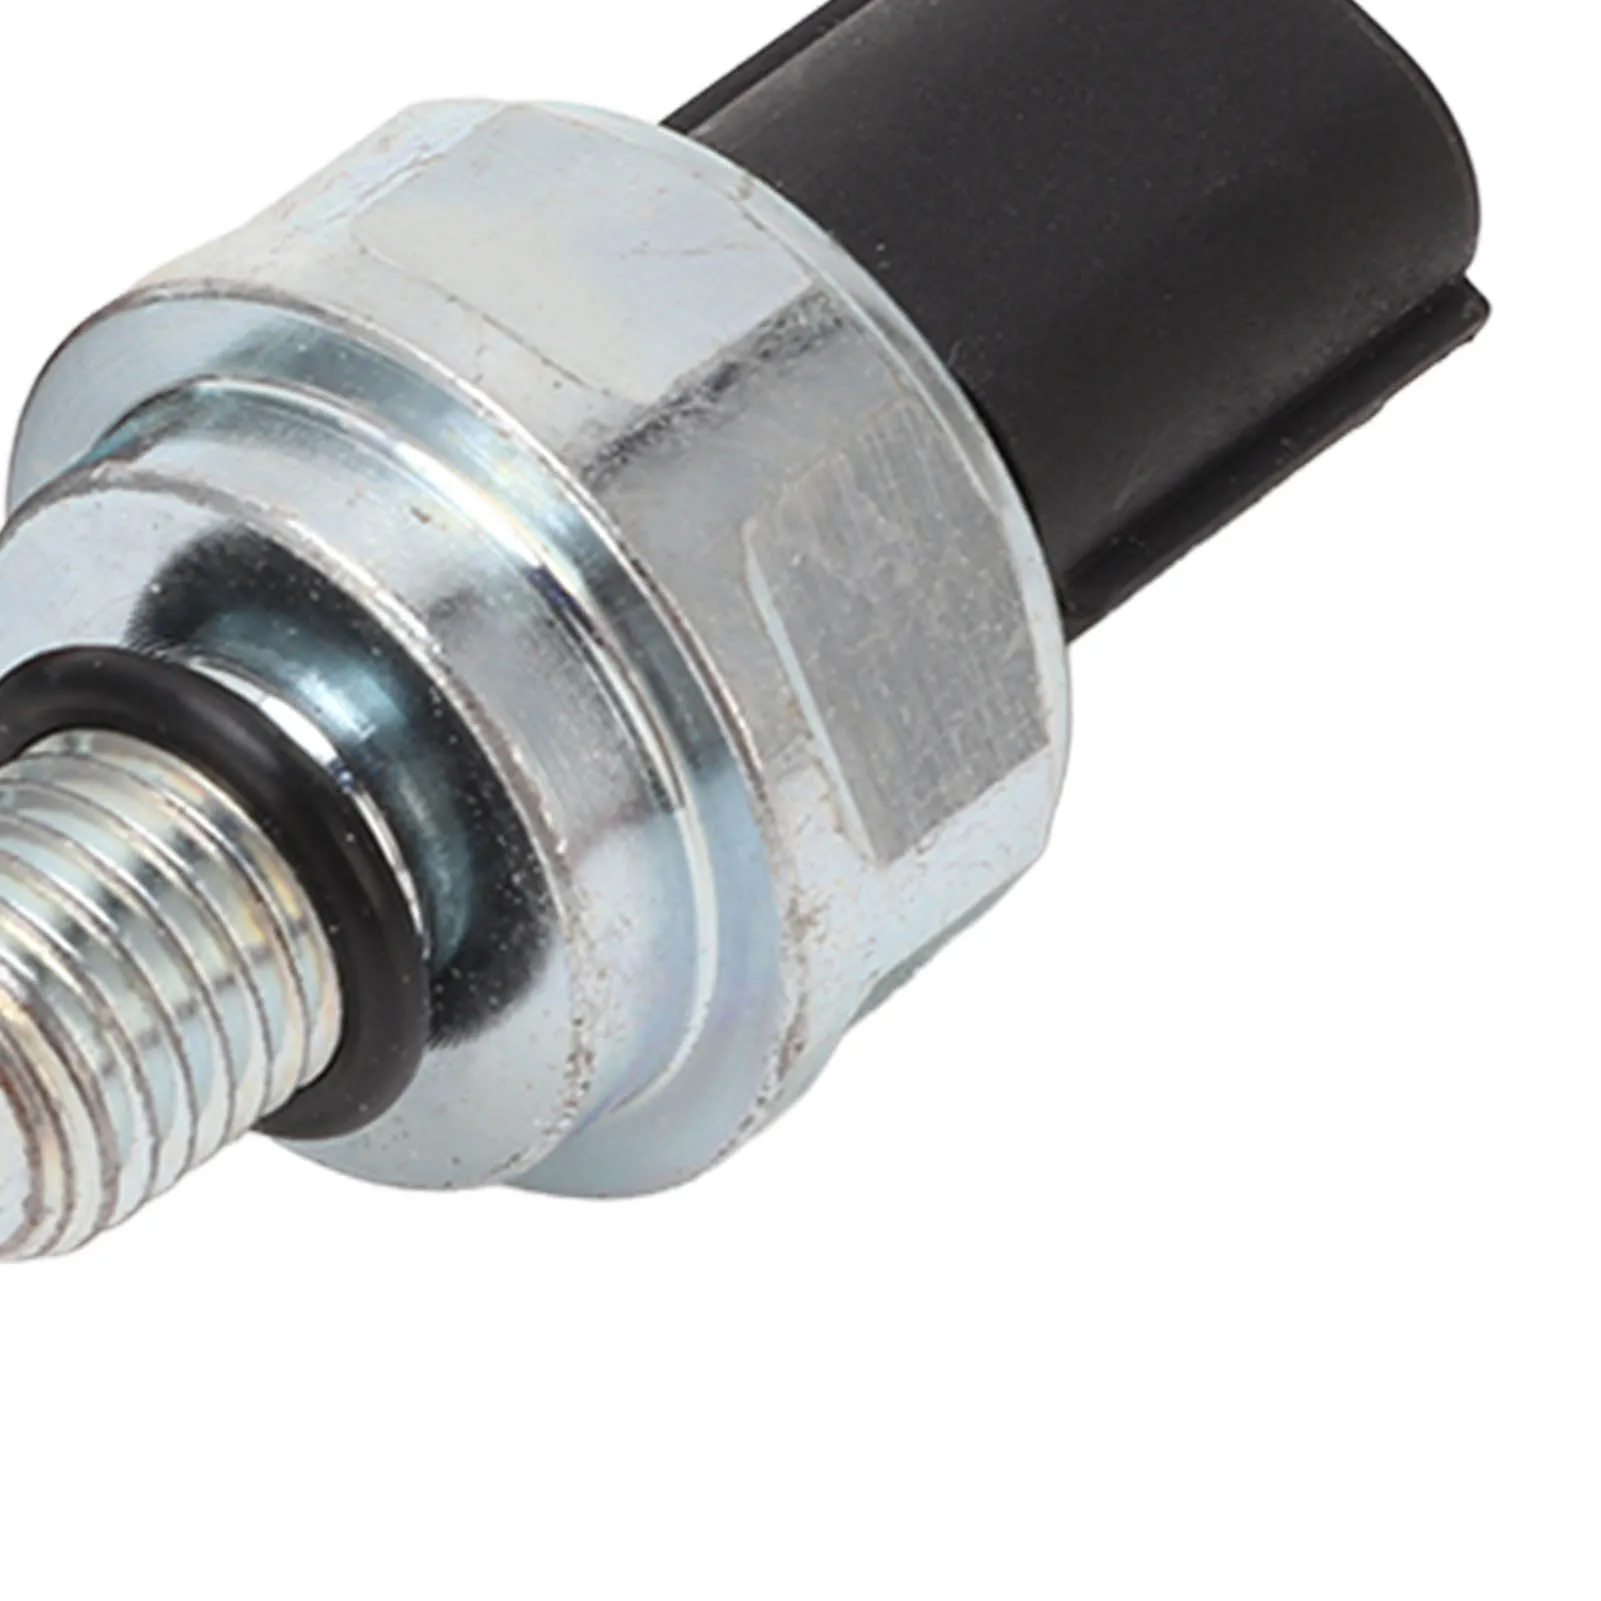 Transmission Pressure Switch High Sensitivity 28600 P7Z 003 for Acura MDX 2001 - £16.19 GBP